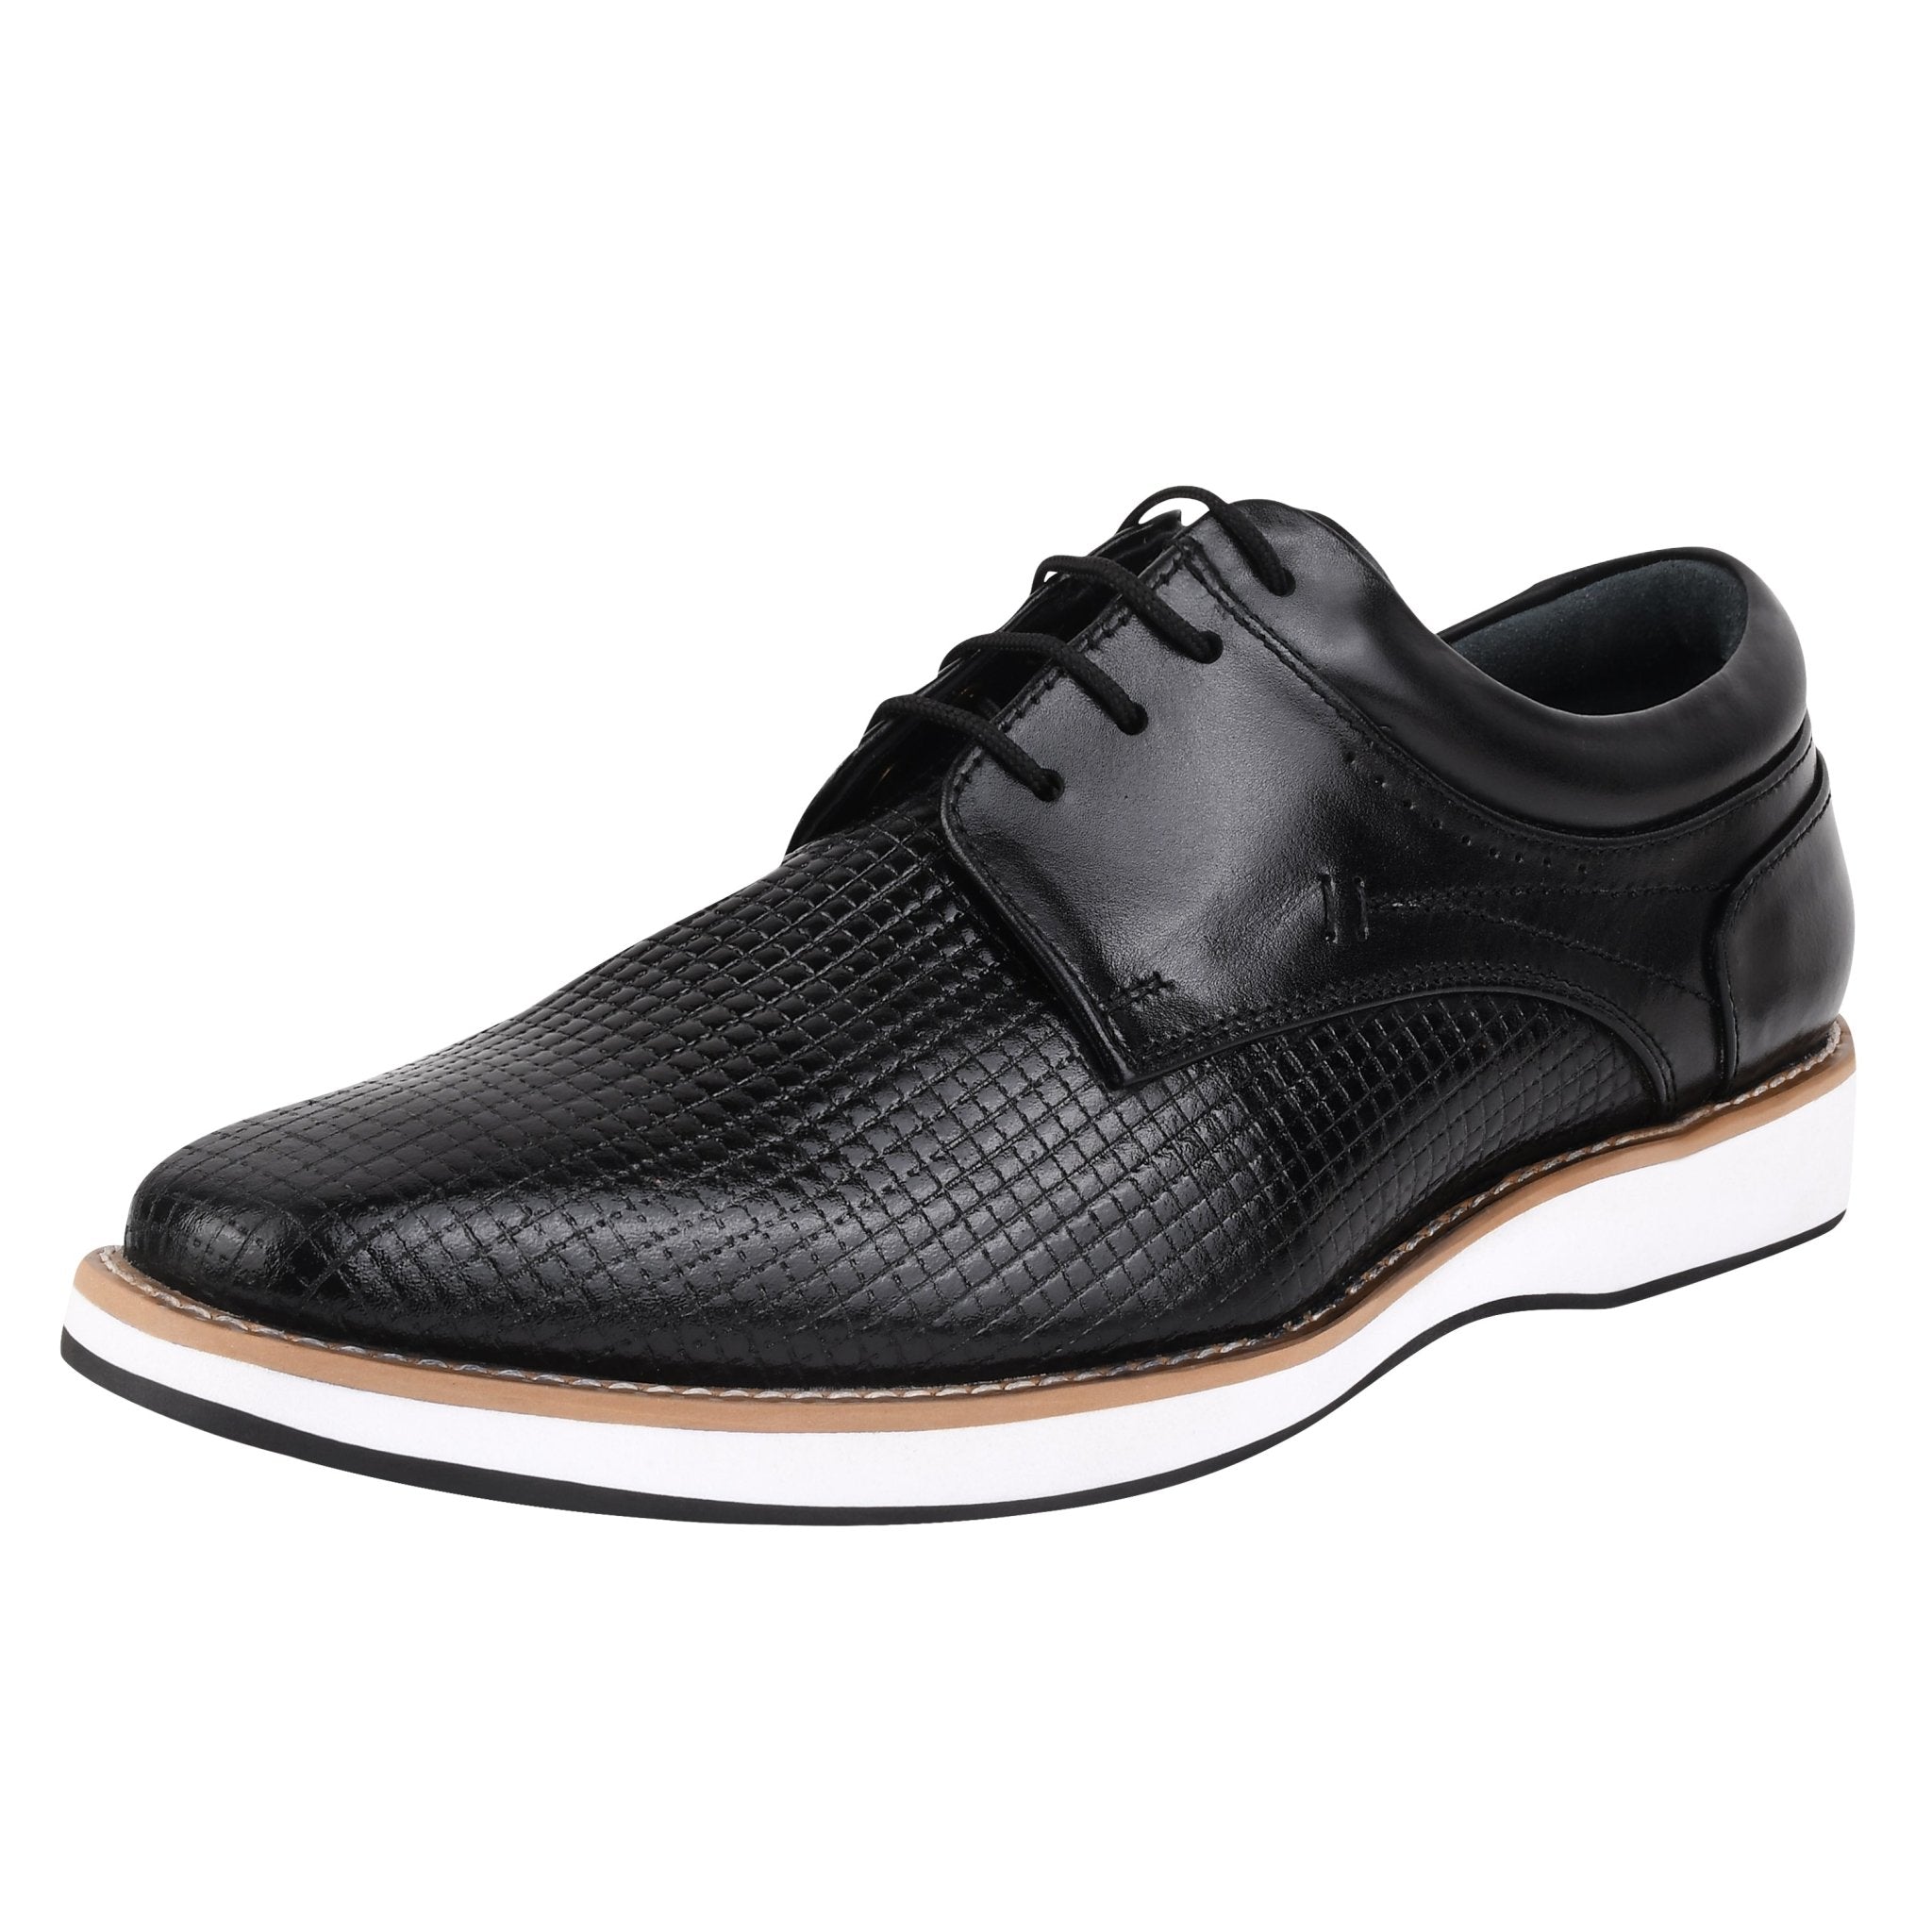 GARY Eva Genuine Leather Oxford Casual Shoes for Men